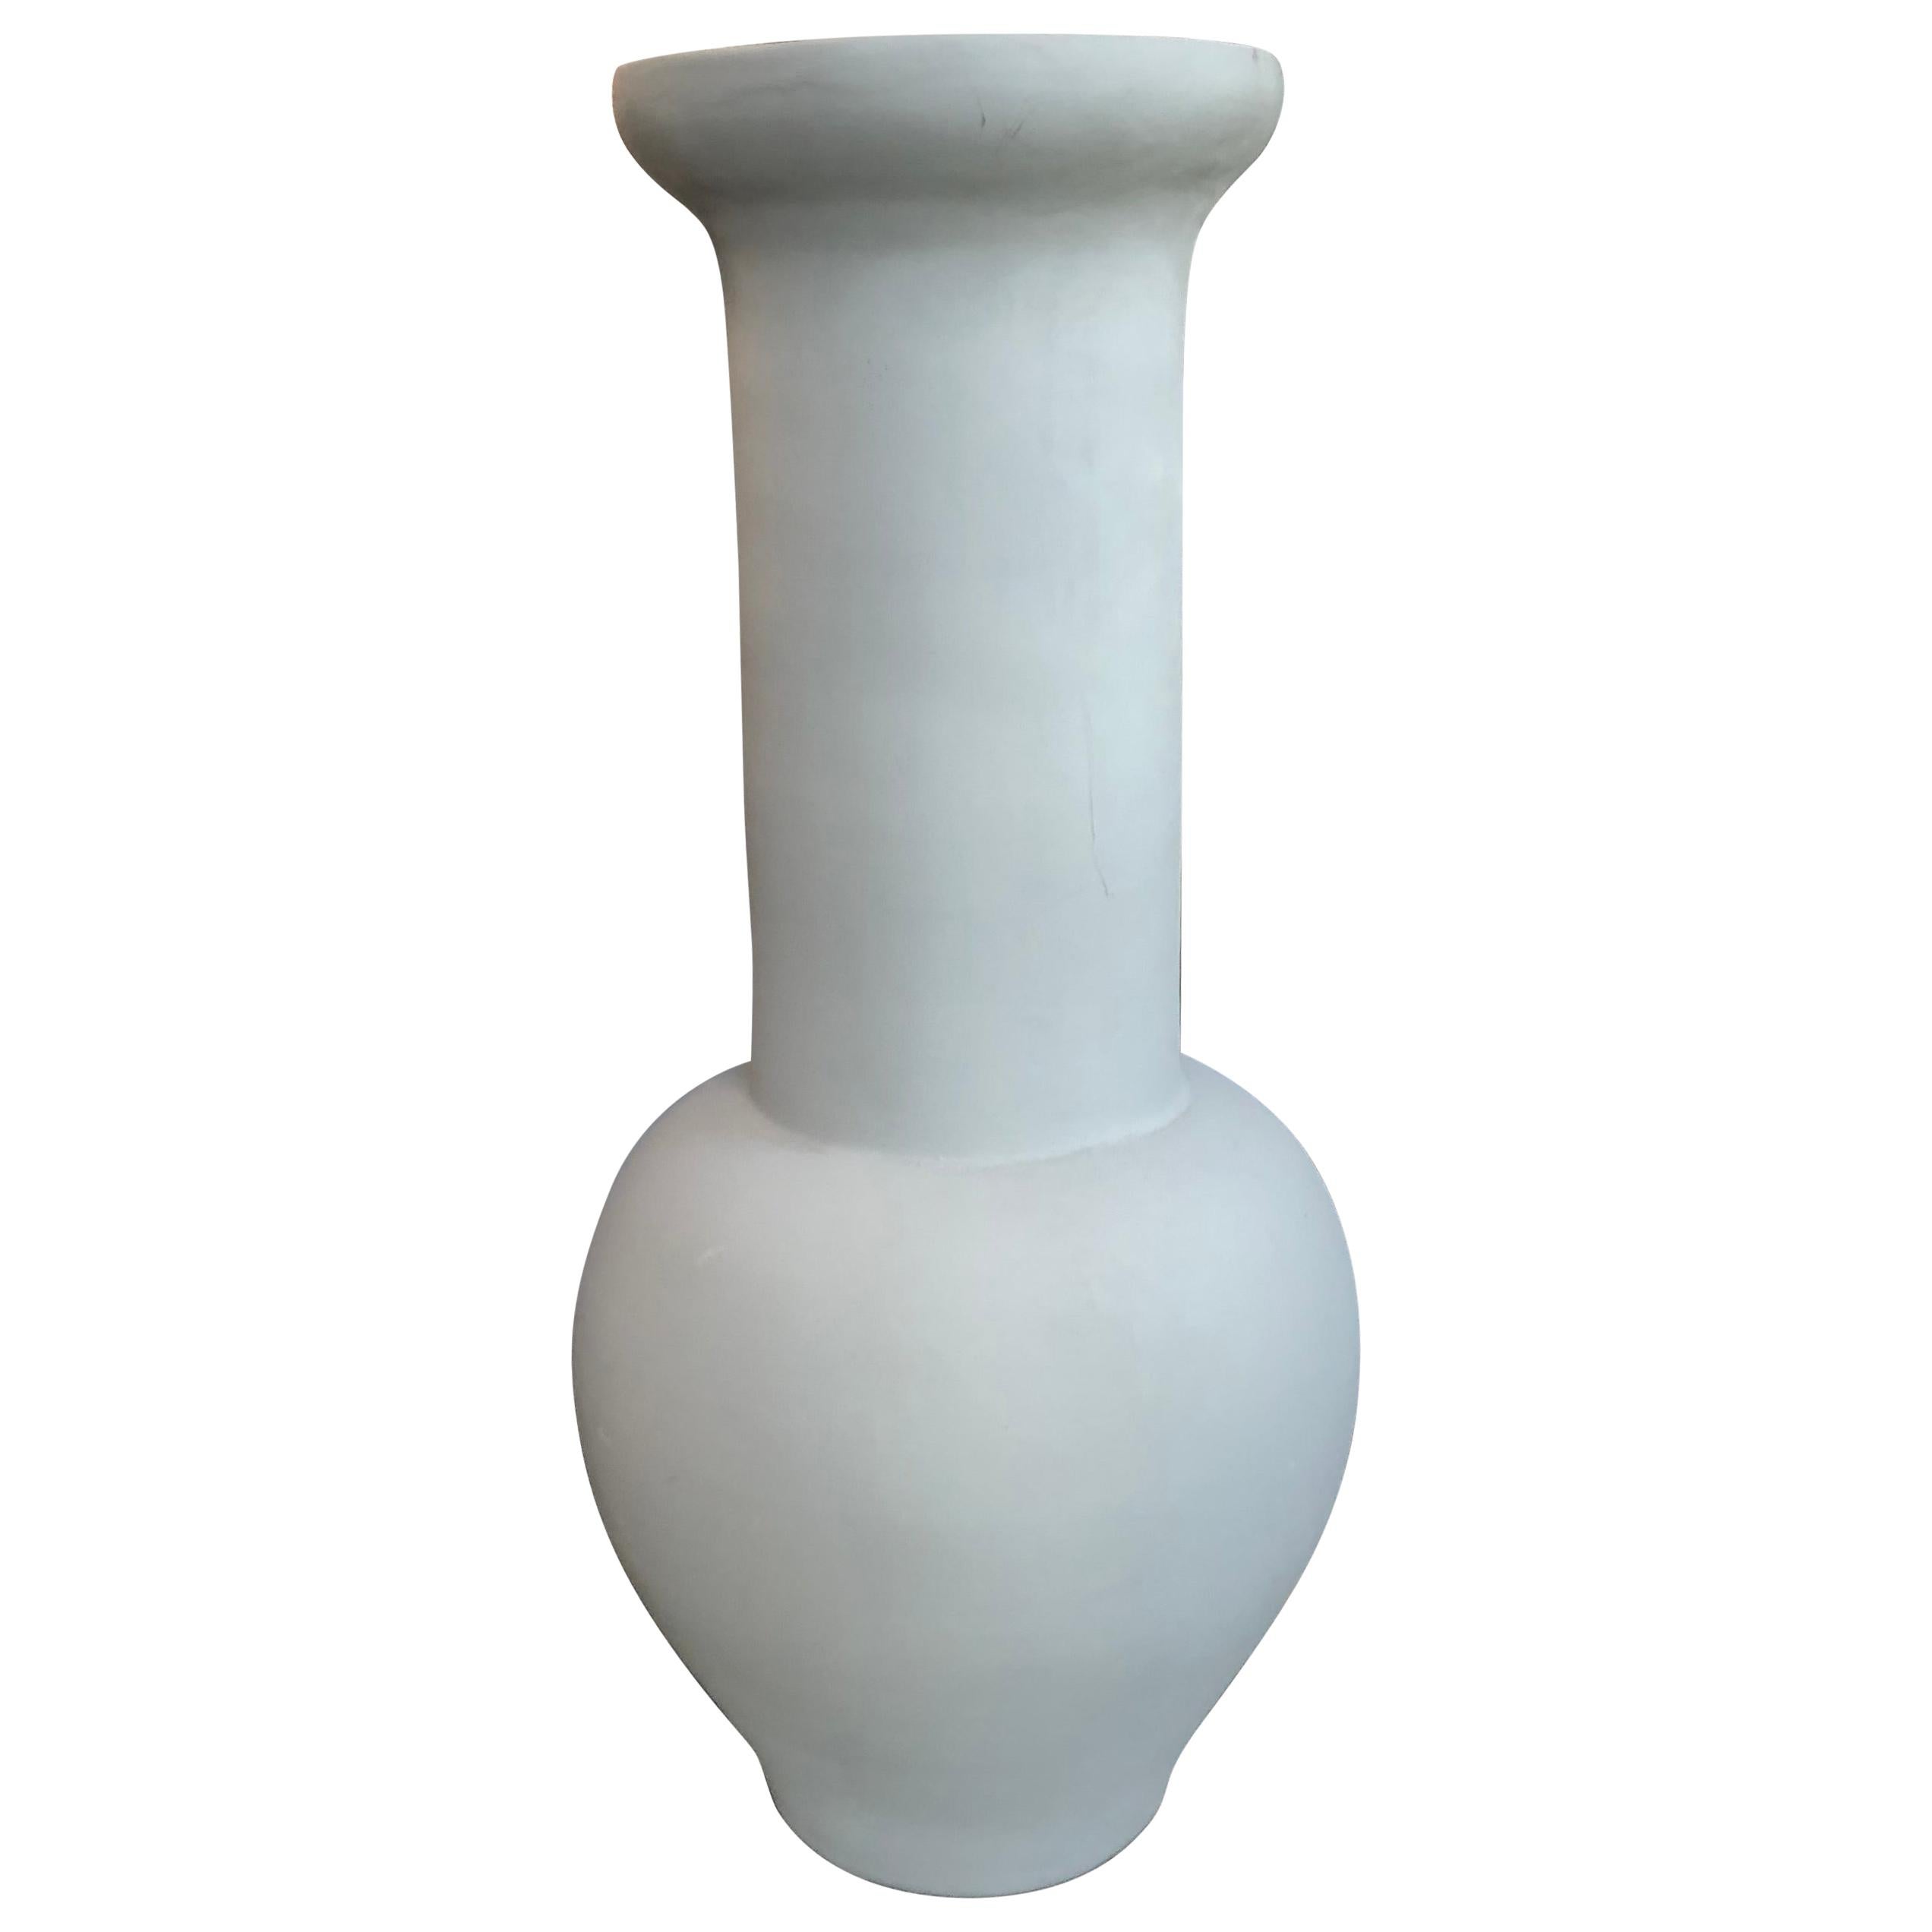 Overscaled Classical Resin Vase